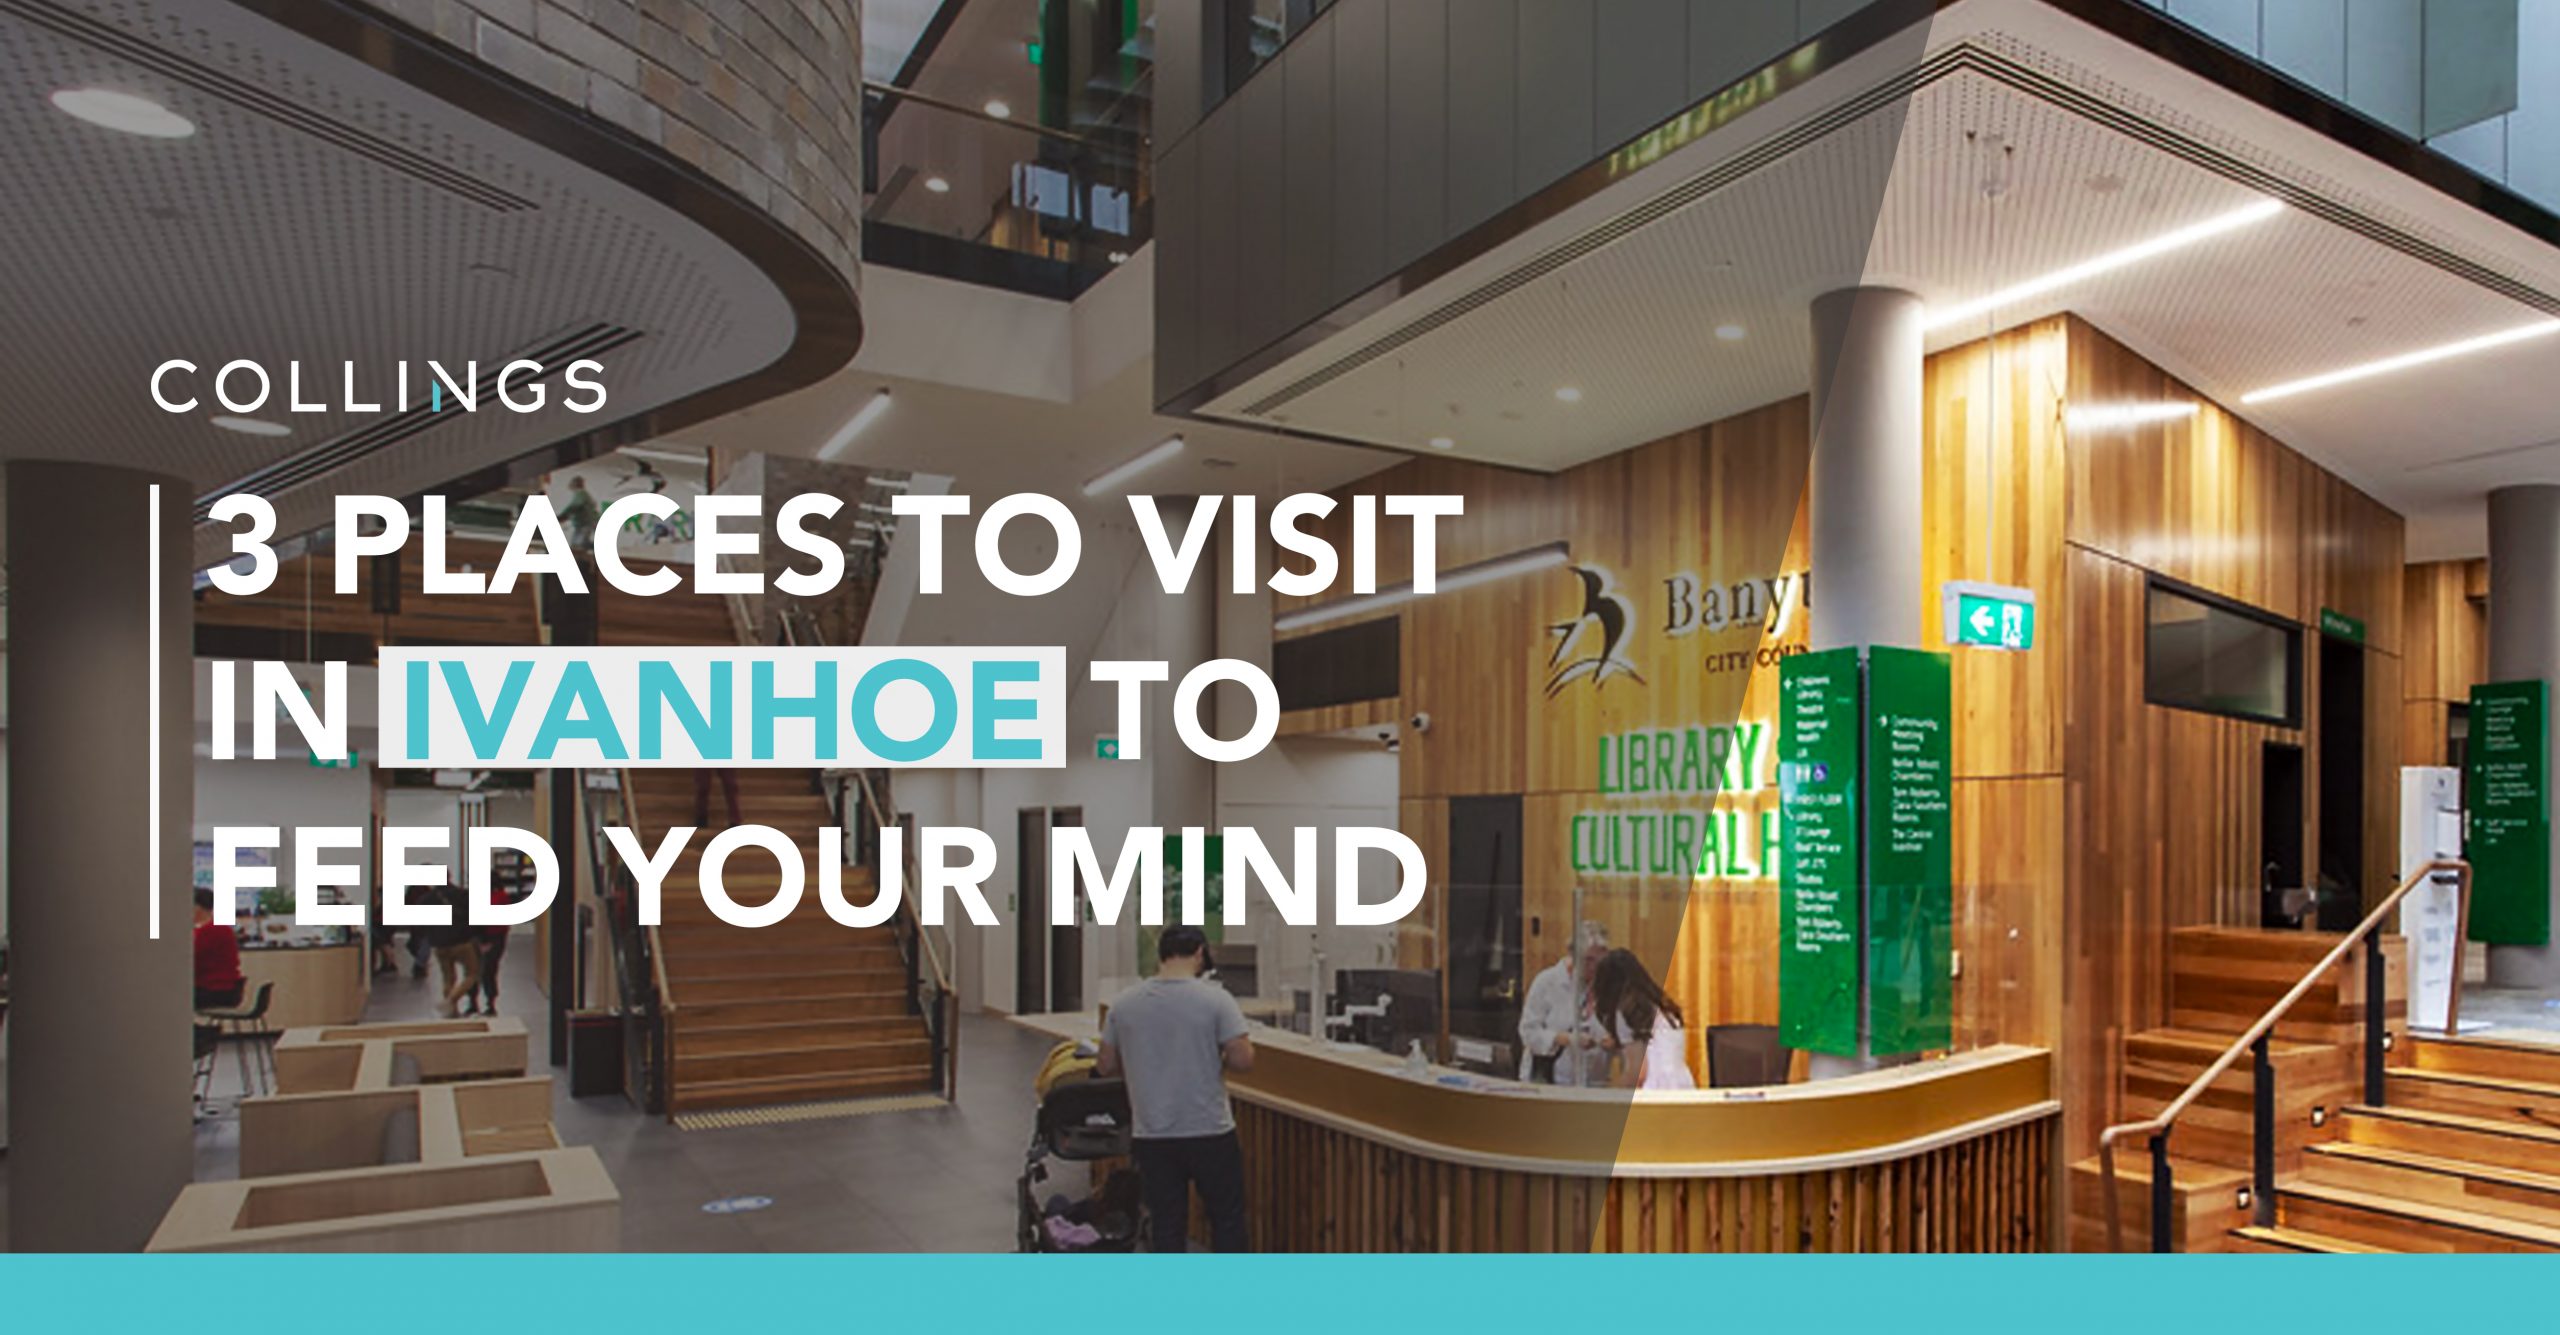 3 Places to Visit Ivanhoe to Feed Your Mind